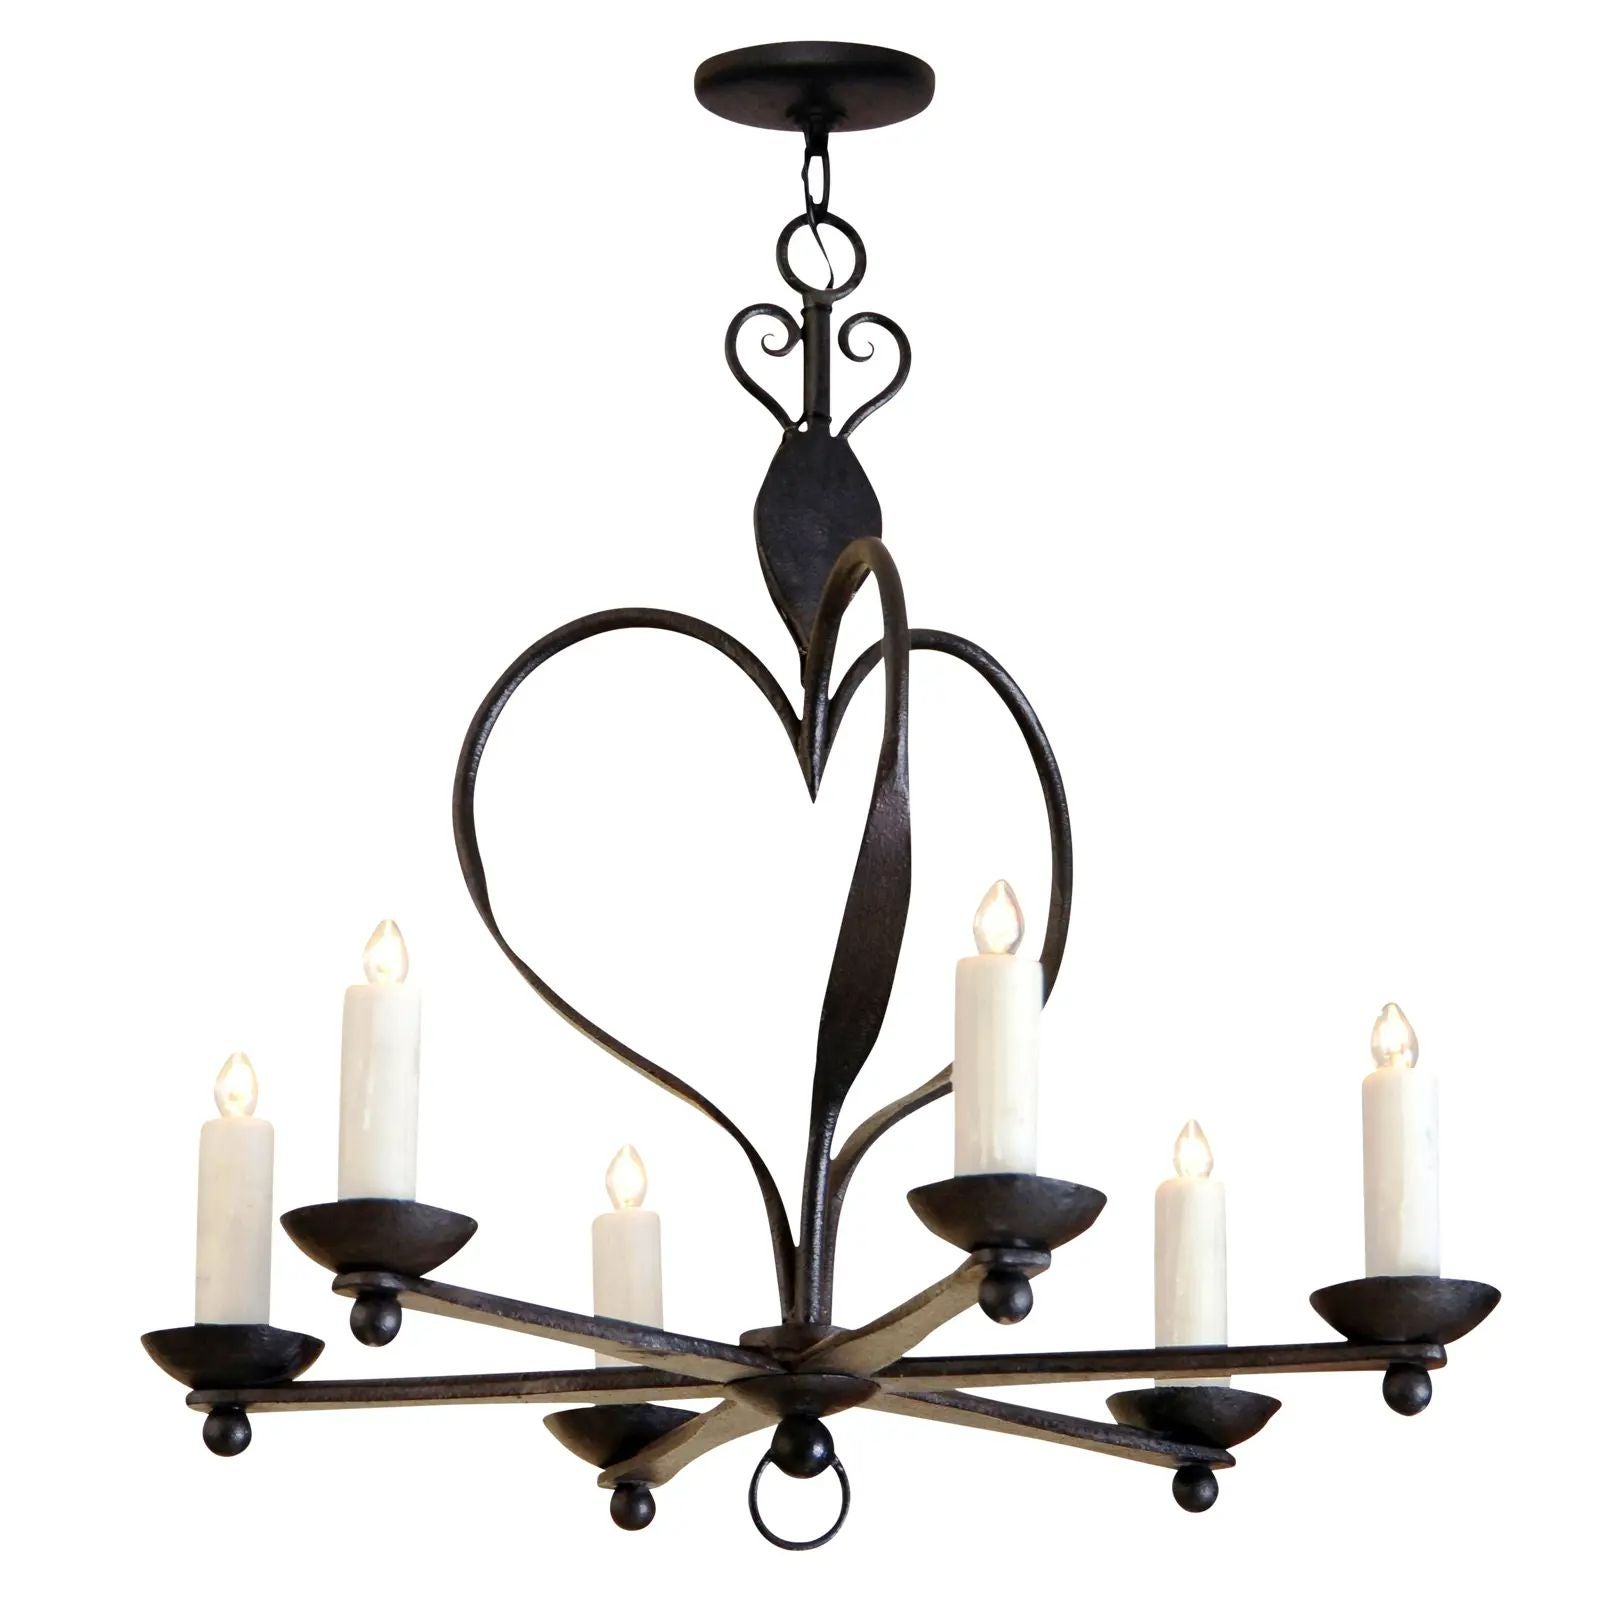 Italian 6 Arm Wrought Iron Chandelier by Randy Esada Designs for Prospr For Sale